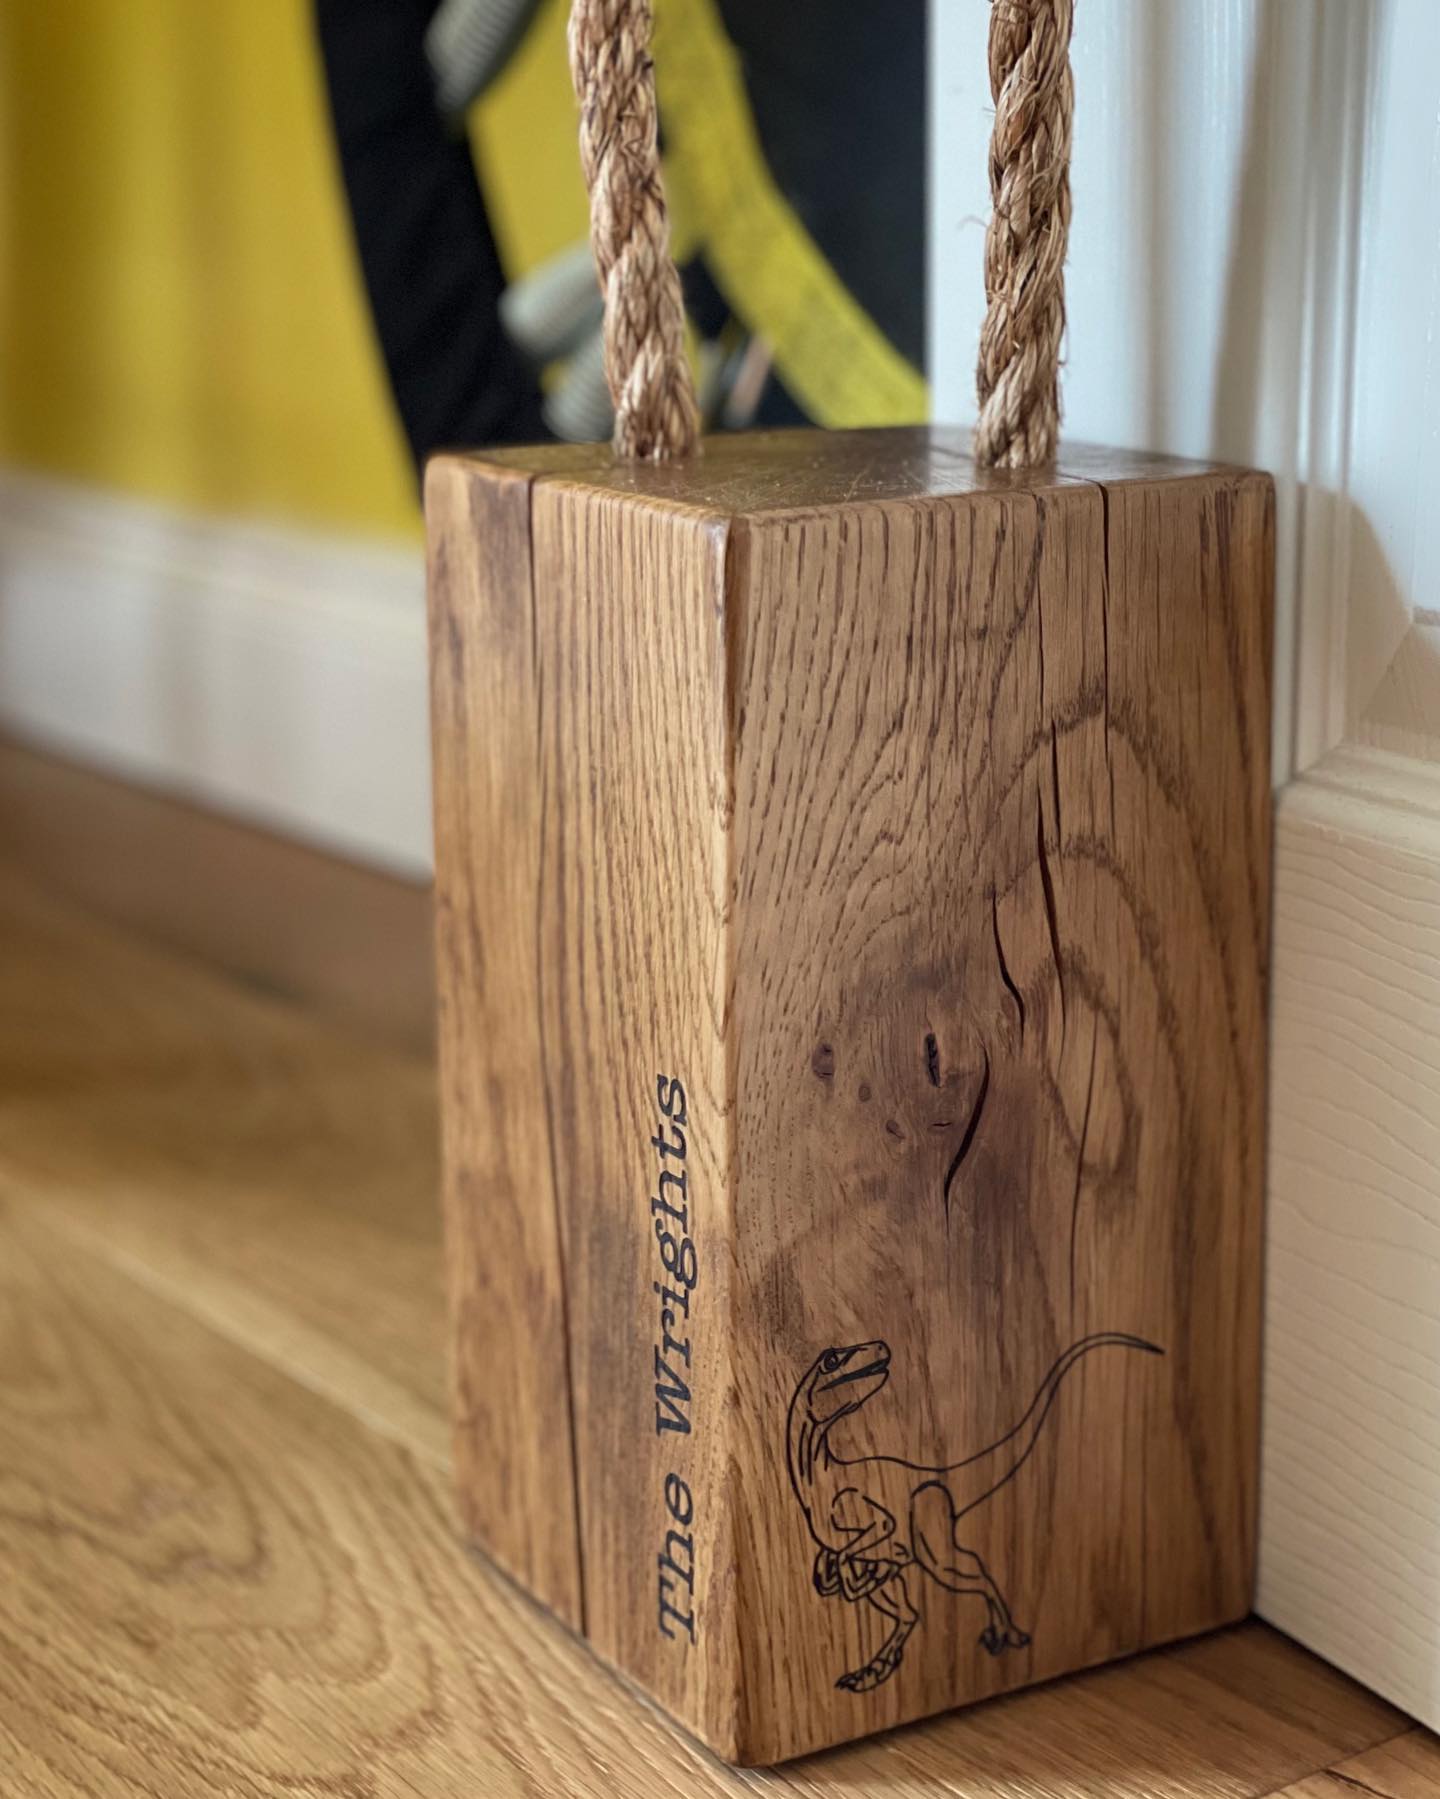 A lovely doorstop commission for my brother ?And a great snap of it in action!...#personalise #handcrafted #homedecor #lifestylephotography #home #doorstop #solidoak #raptor #family #gingerandtweed